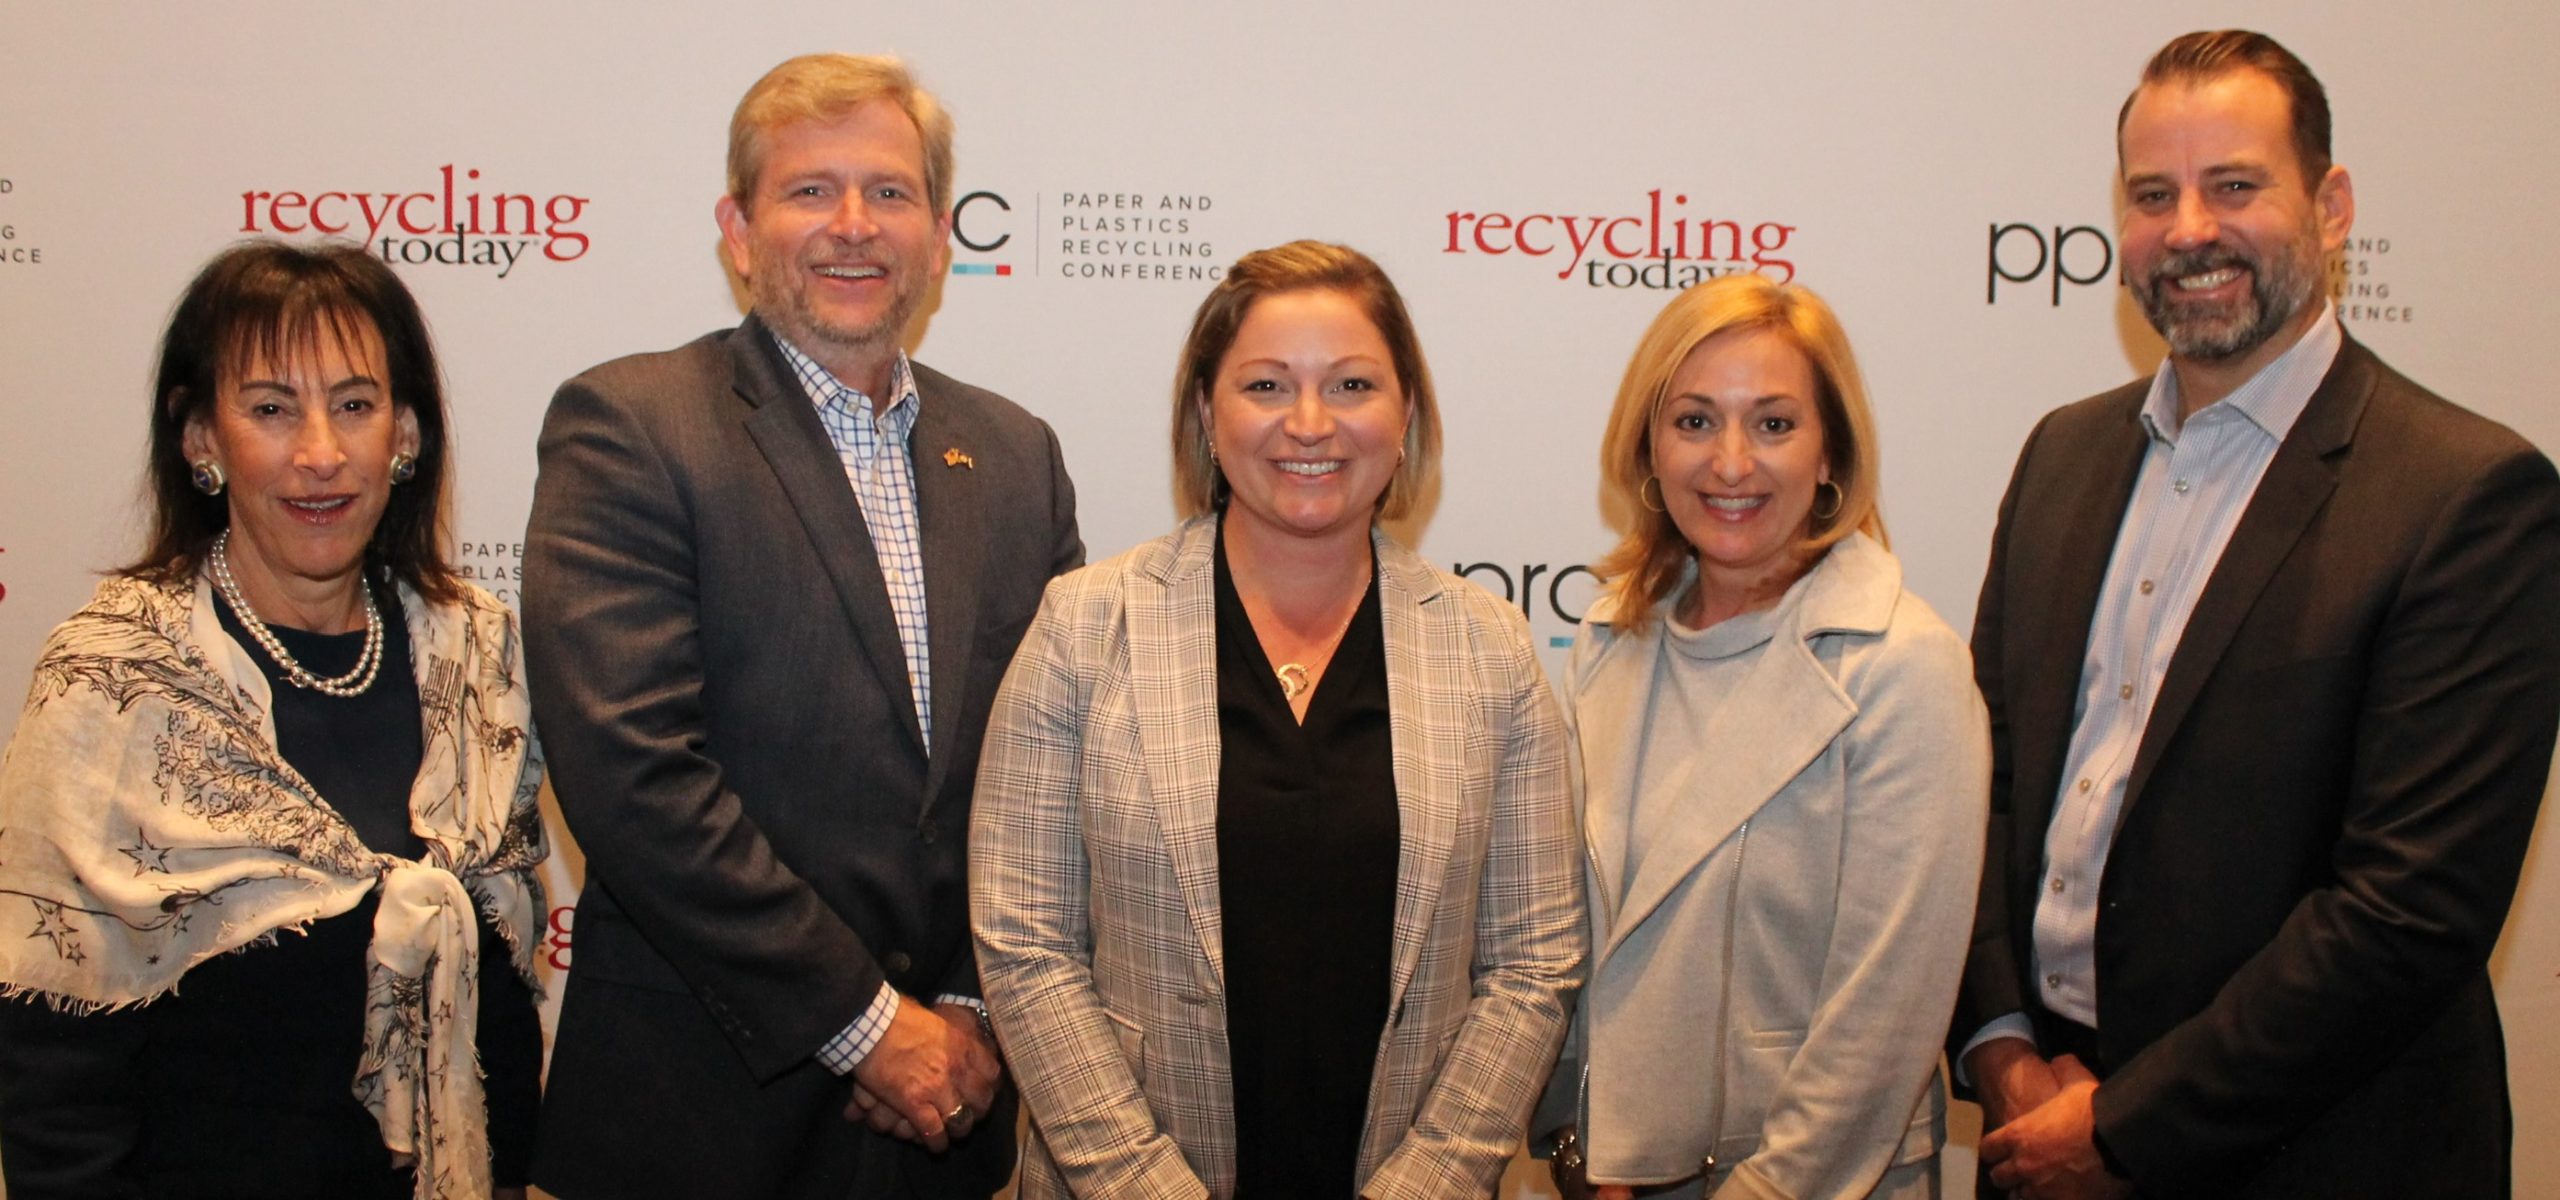 PSI Panel Focuses on Transportation Challenges and Remedies for Recyclers